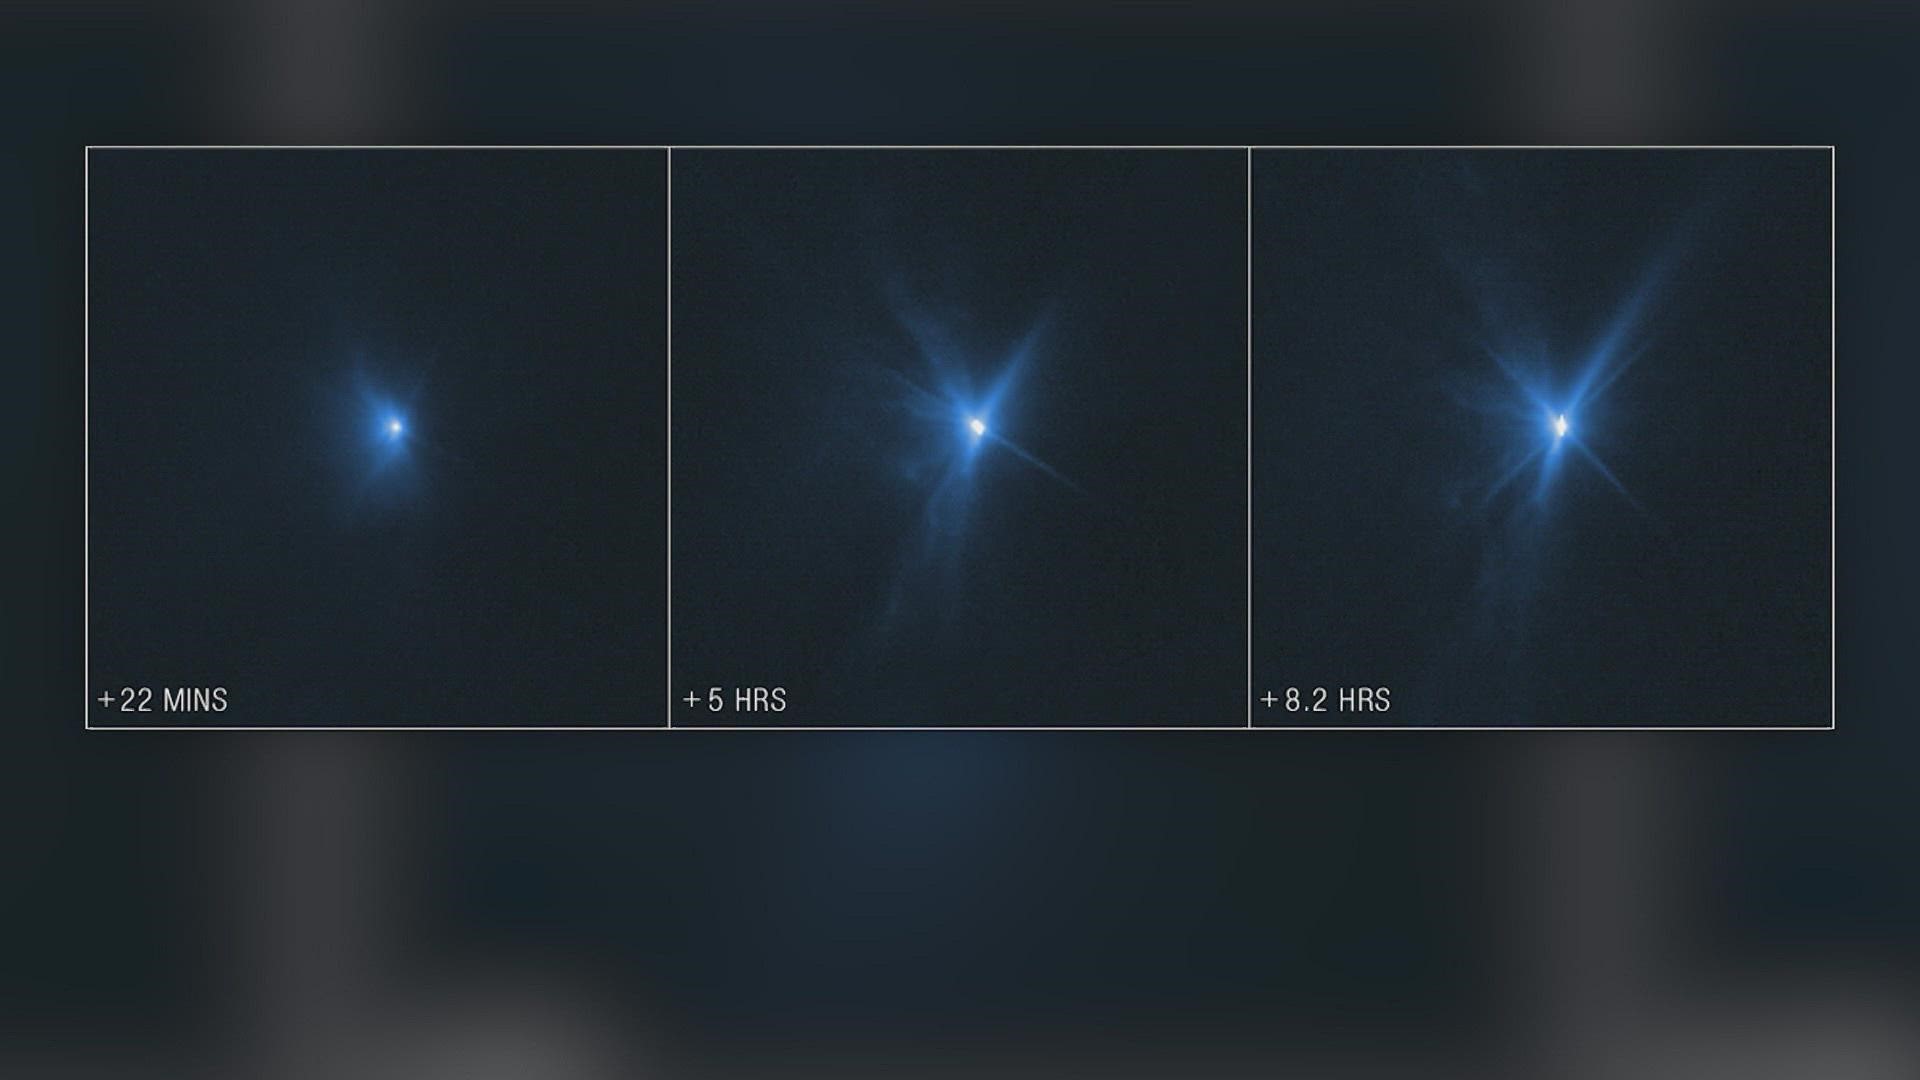 Images from the telescope were taken before and after the crash.